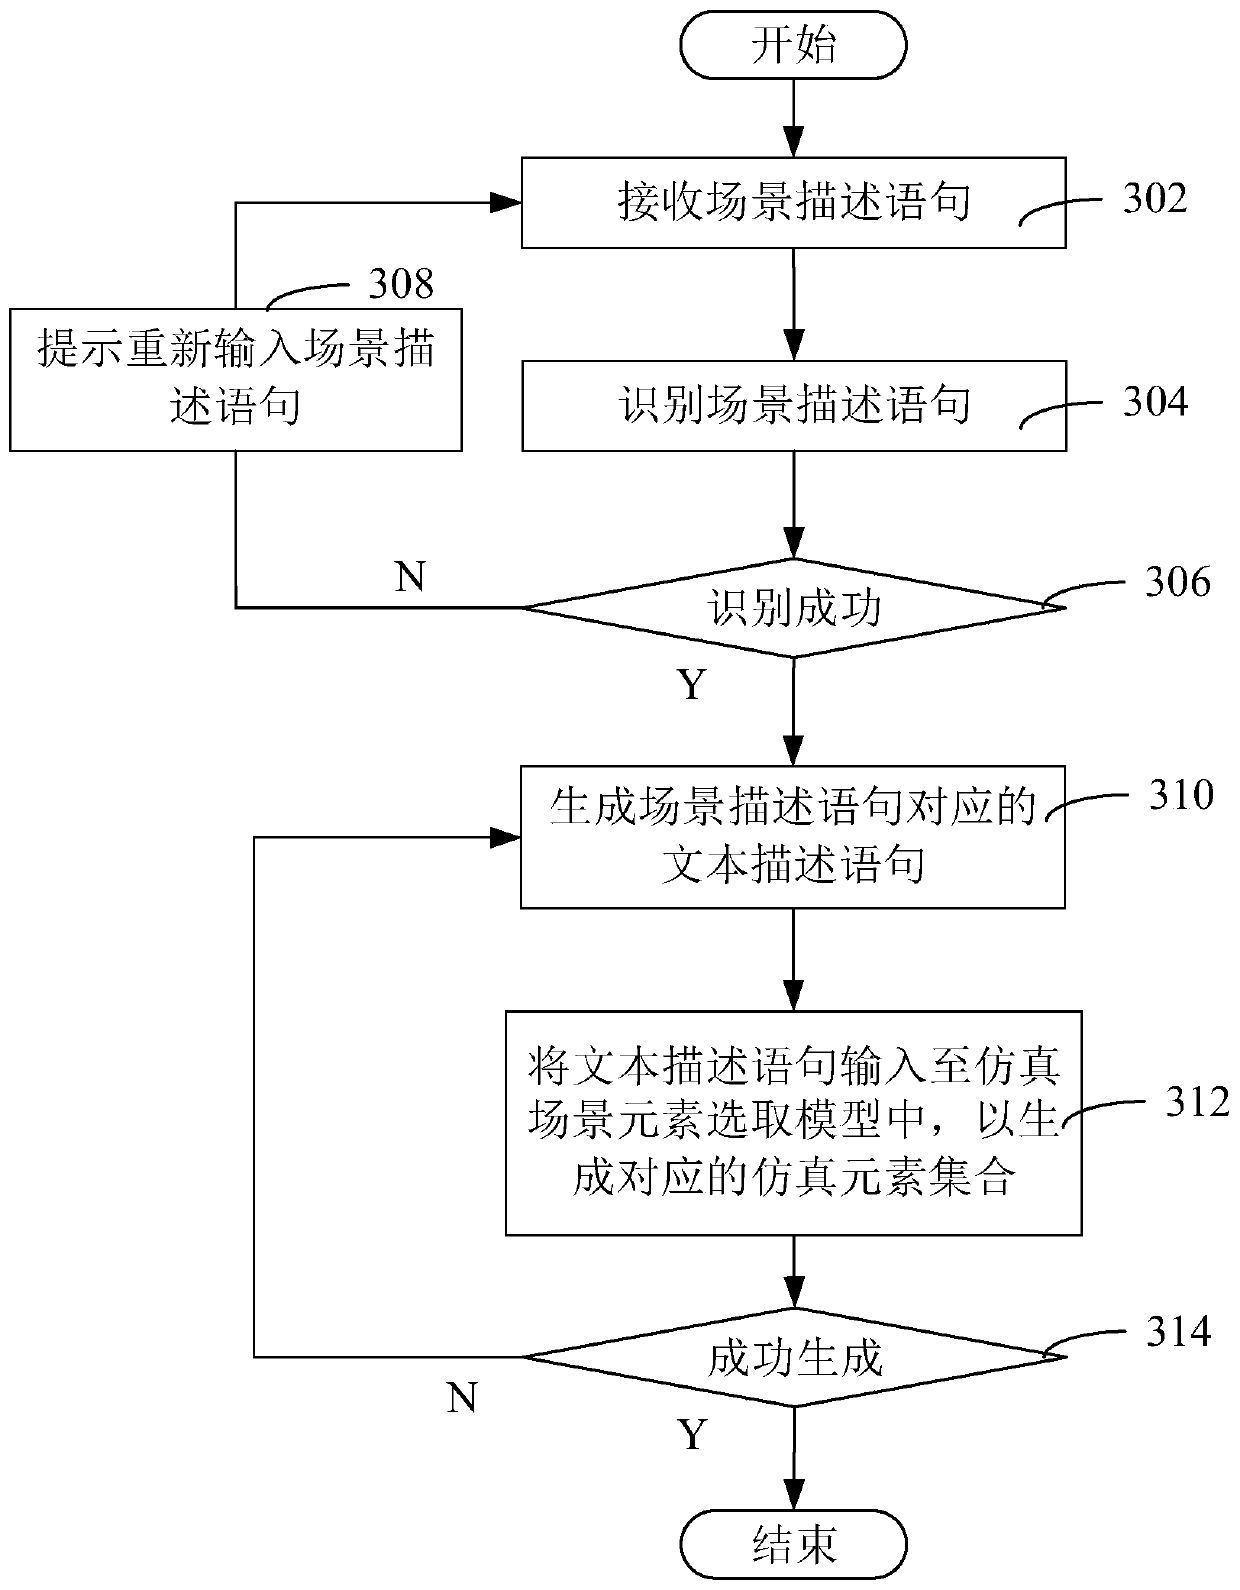 Simulation scenario generation method and unmanned driving system test method